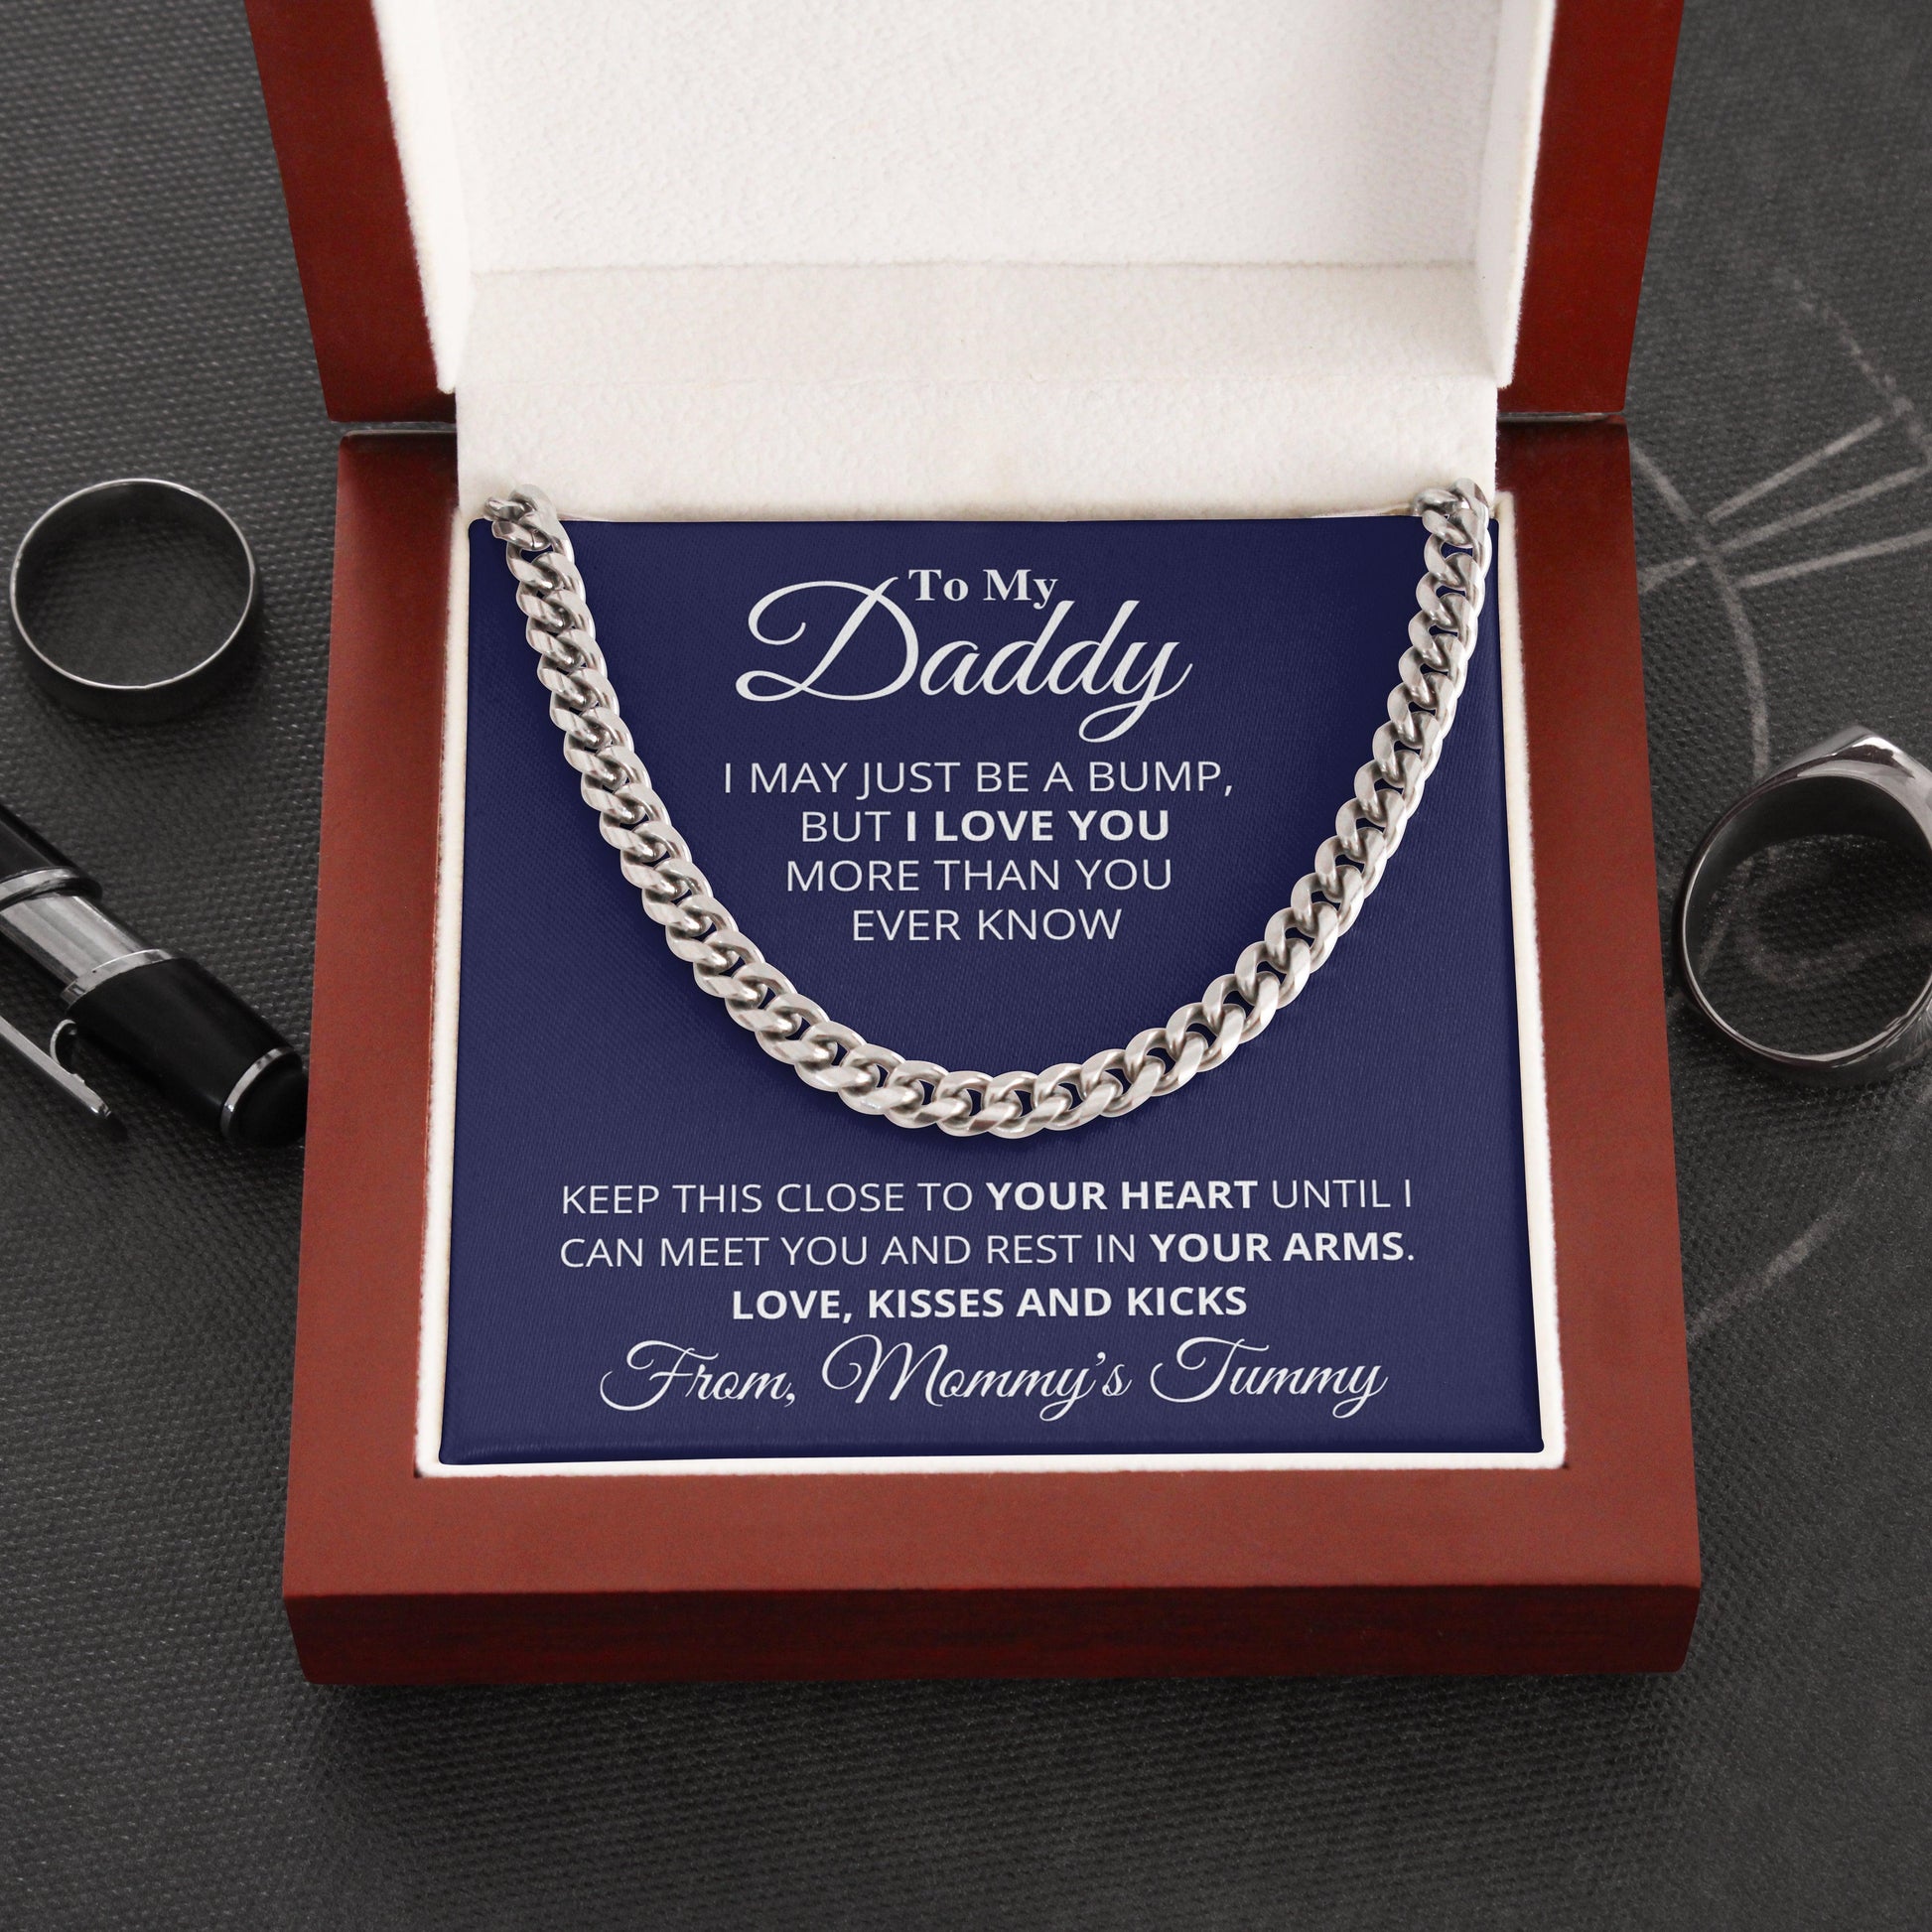 Jewelry gifts Daddy - Your Heart - Cuban Link Chain - Belesmé - Memorable Jewelry Gifts 